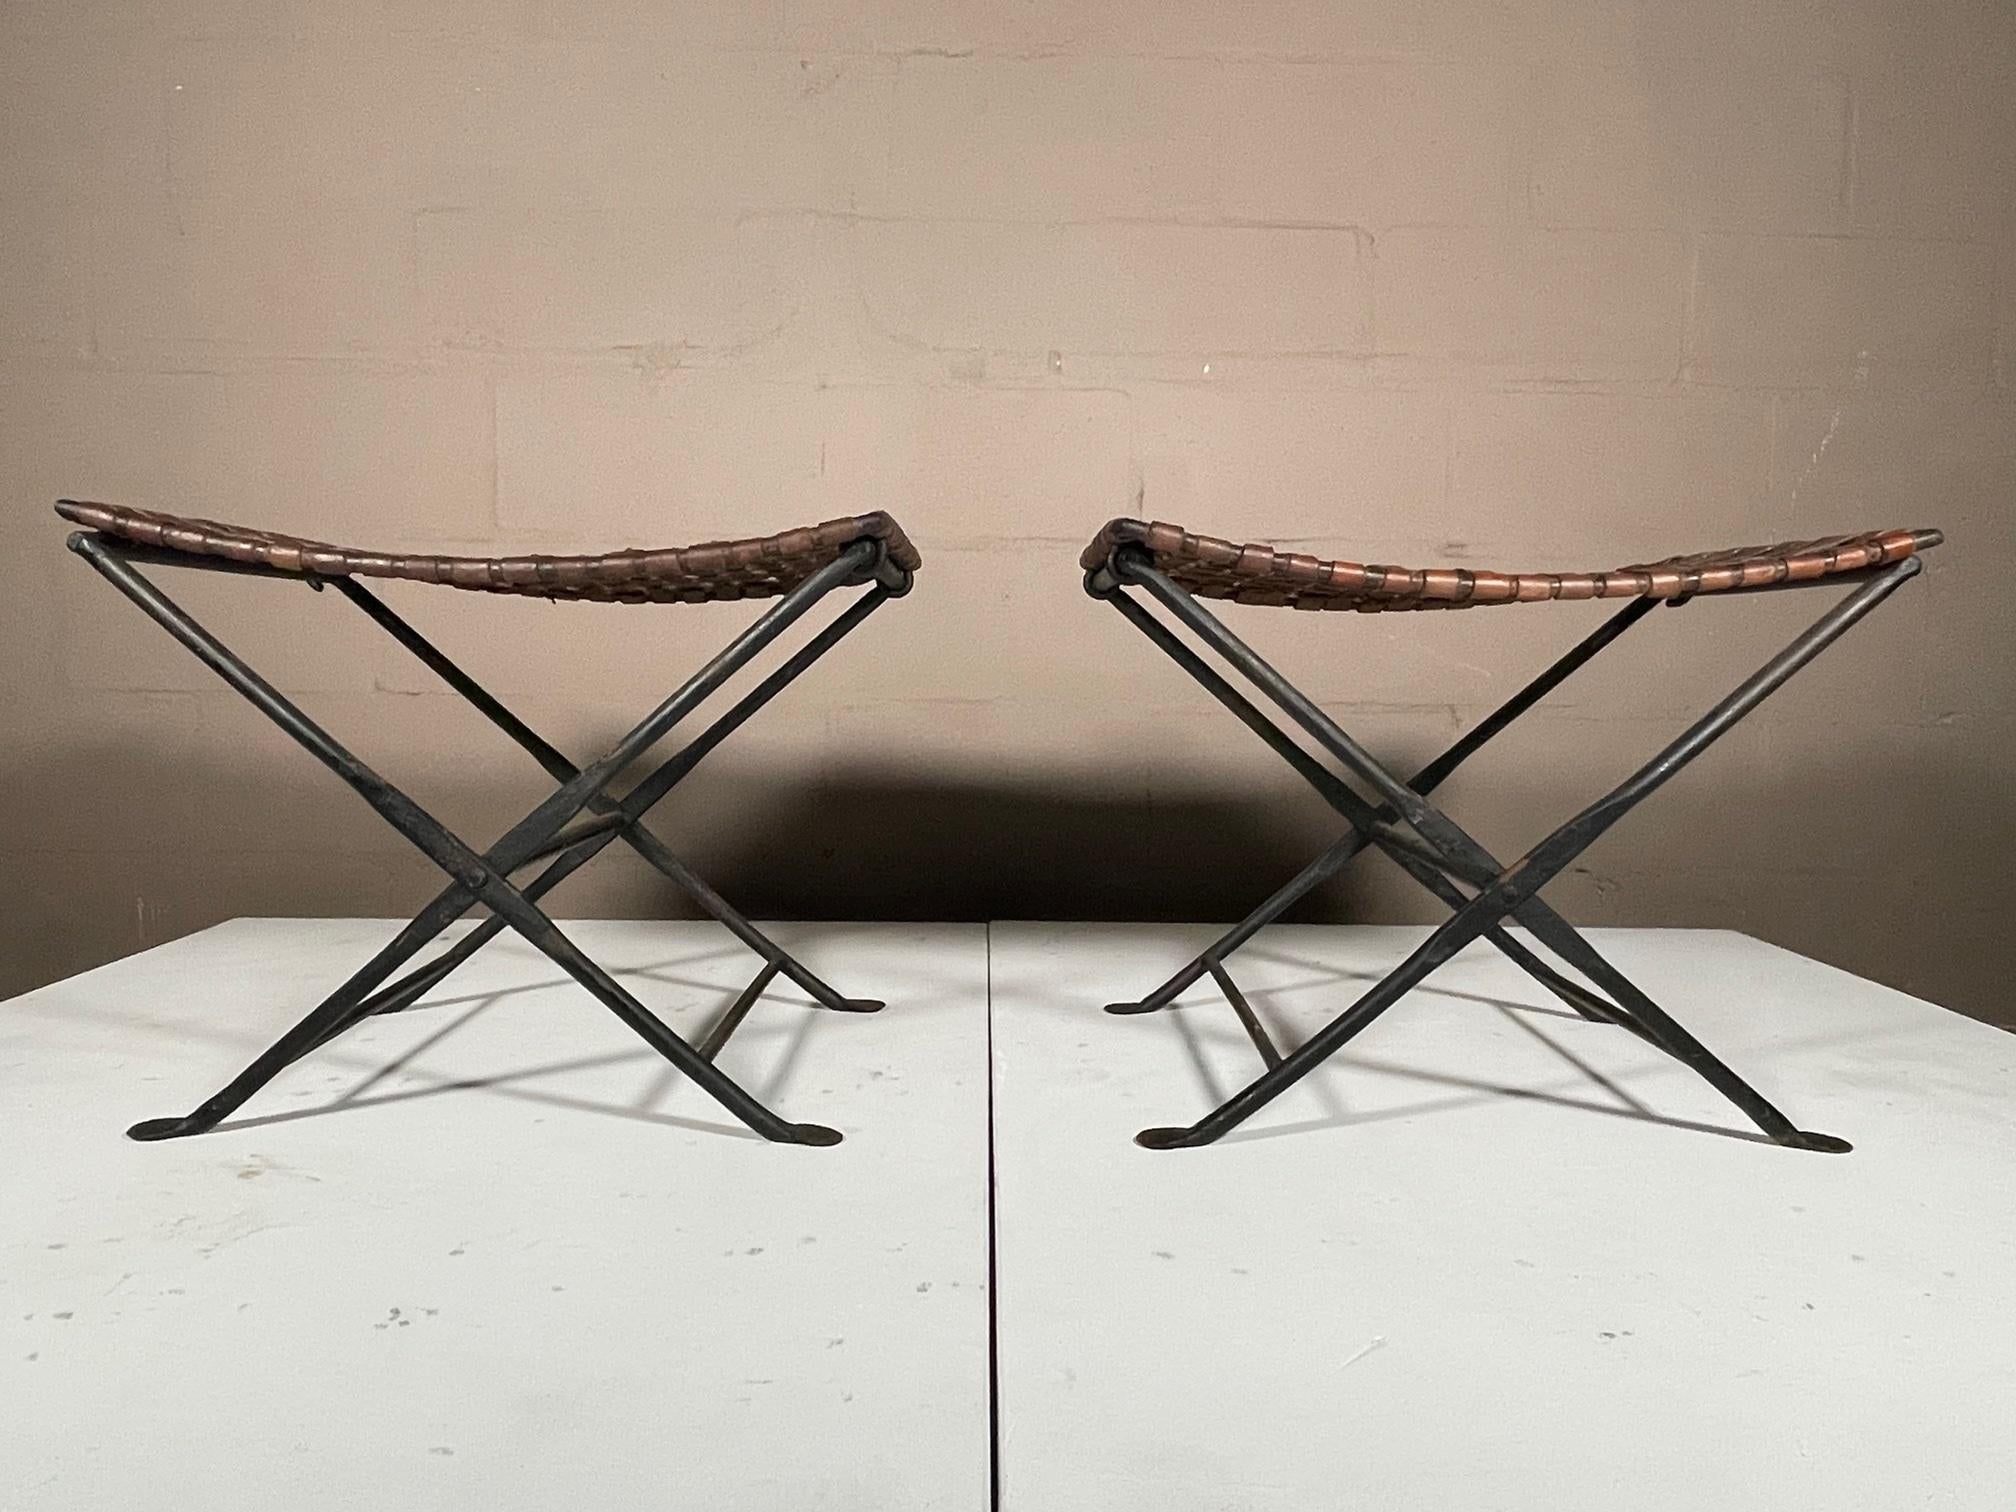 A great pair of folding stools, leather and wrought iron. Beautiful patina, wrought iron is solid and heavy. Priced $1,800 for the pair.